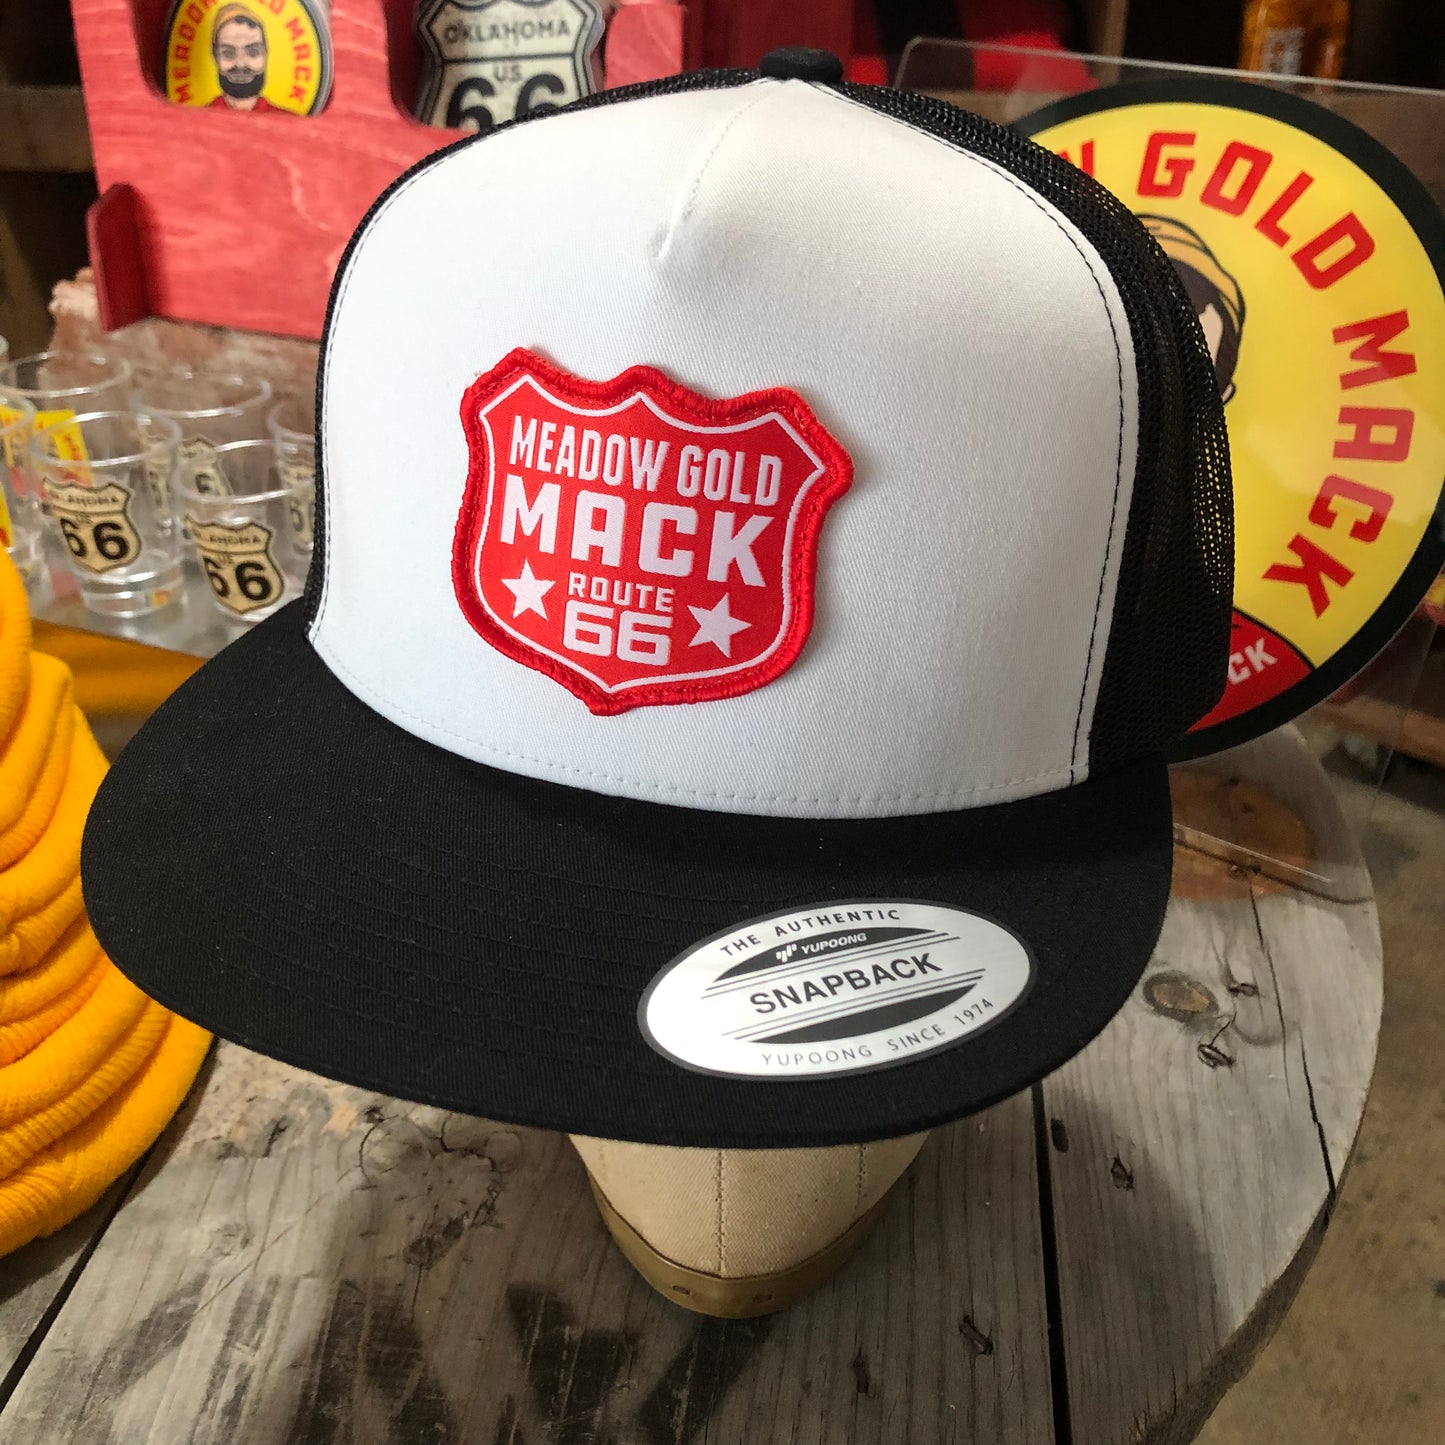 Meadow Gold Mack Route 66 Classic Trucker Hat